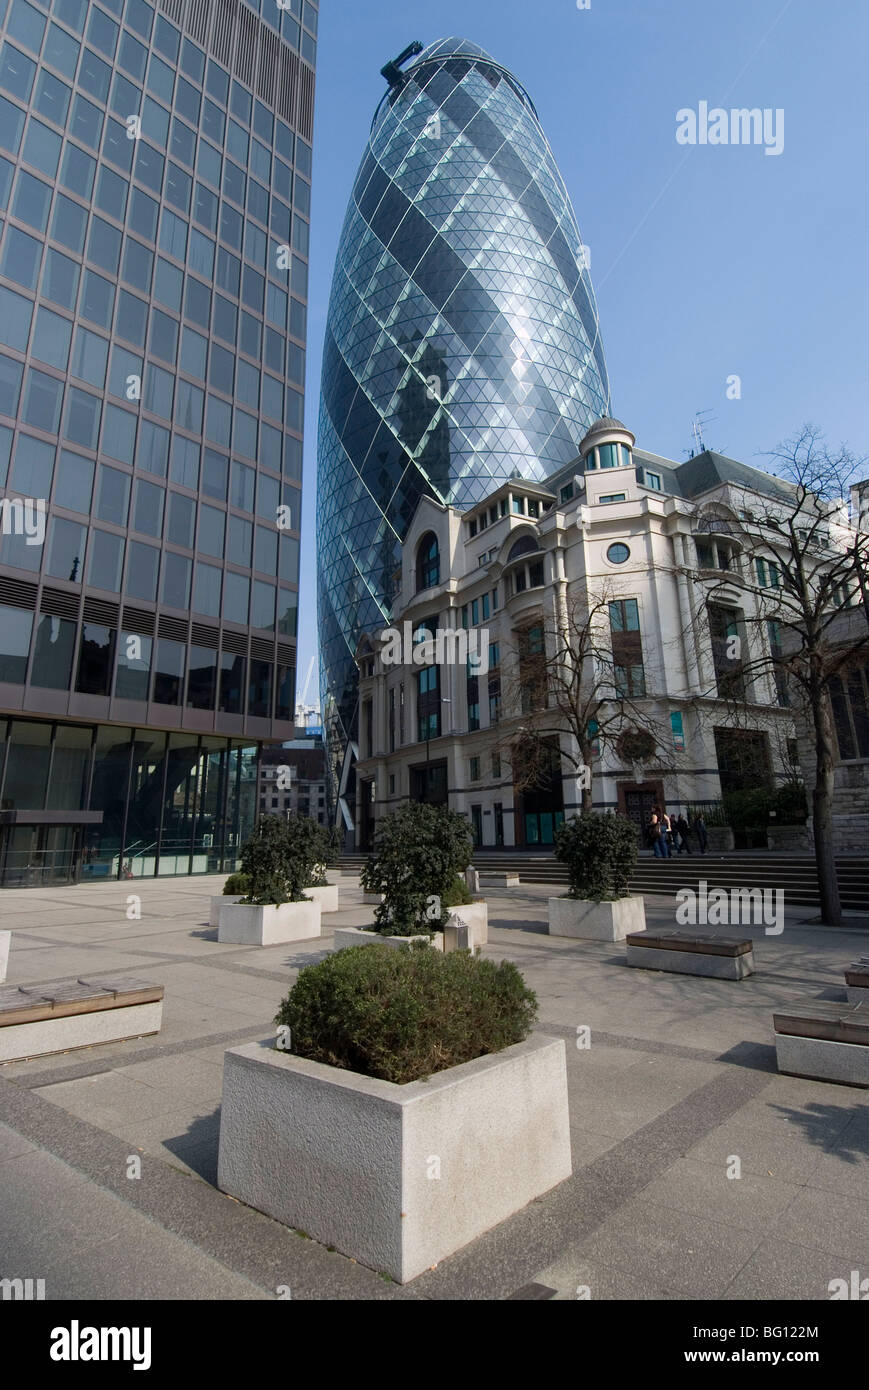 View of the Gherkin (Swiss Re Building), St. Mary Axe, London, England, United Kingdom, Europe Stock Photo